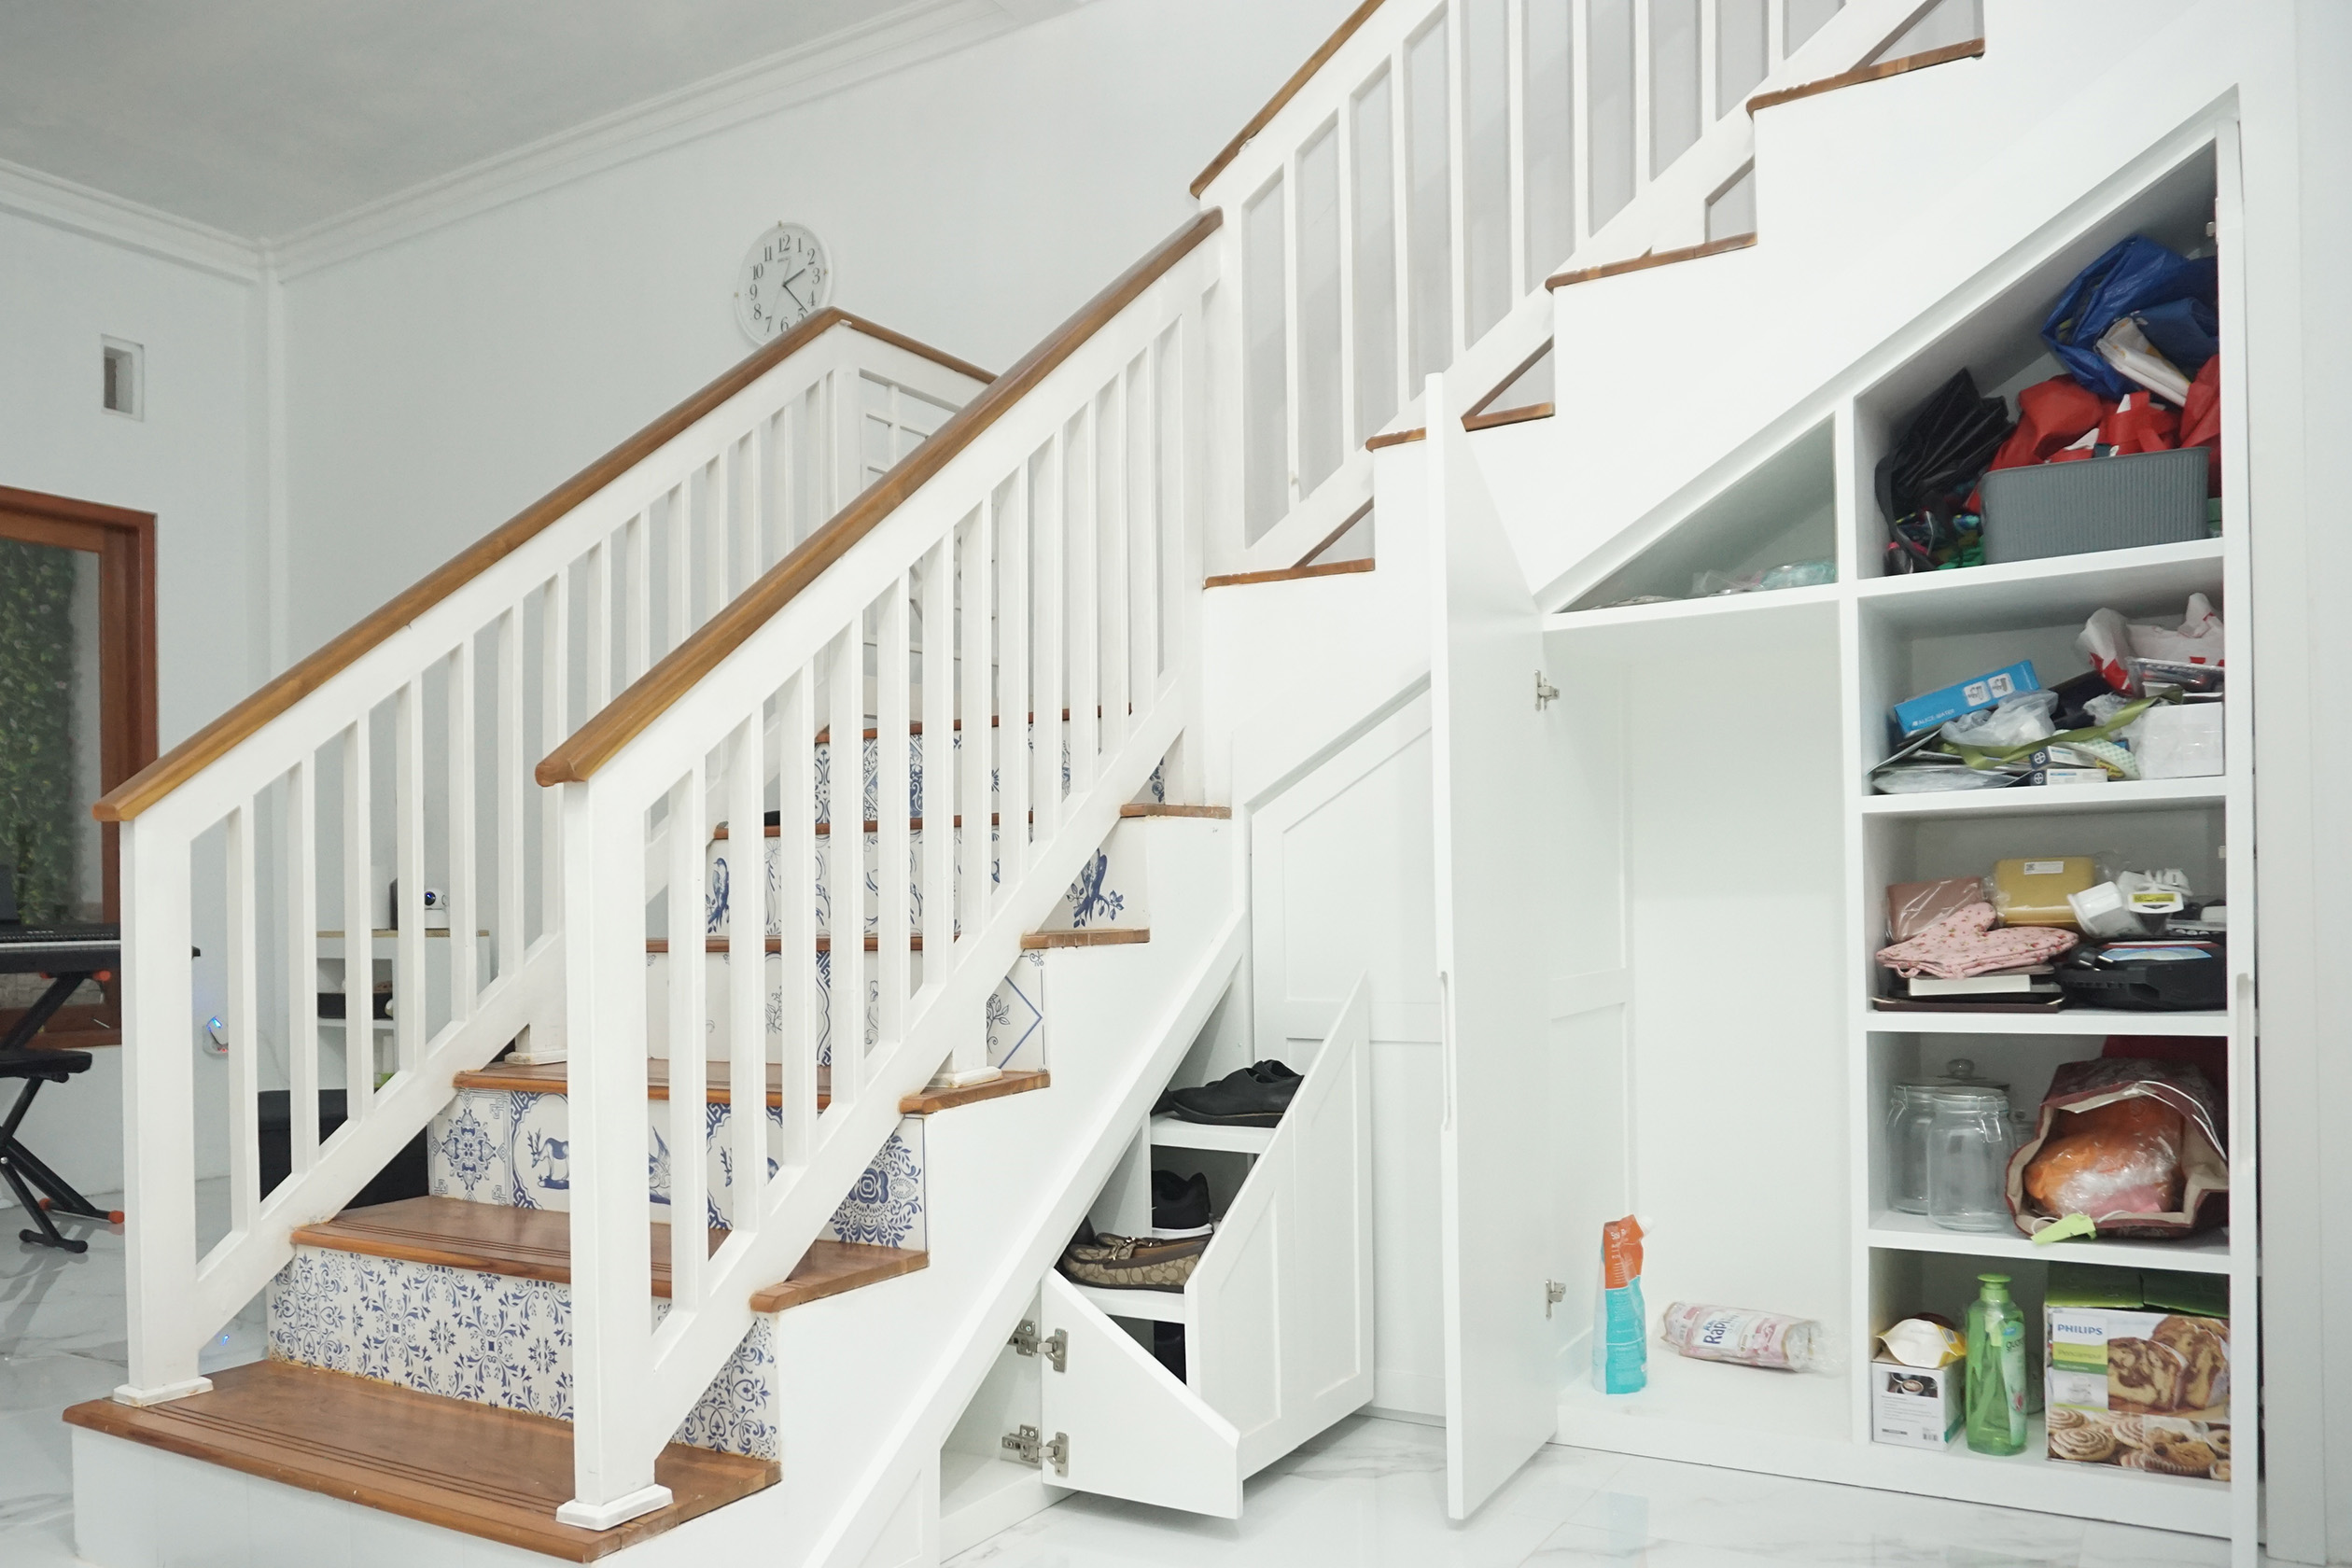 https://www.21oak.com/wp-content/uploads/sites/7/2021/12/staircase-with-under-stair-storage.jpg?fit=2520%2C1680&p=1